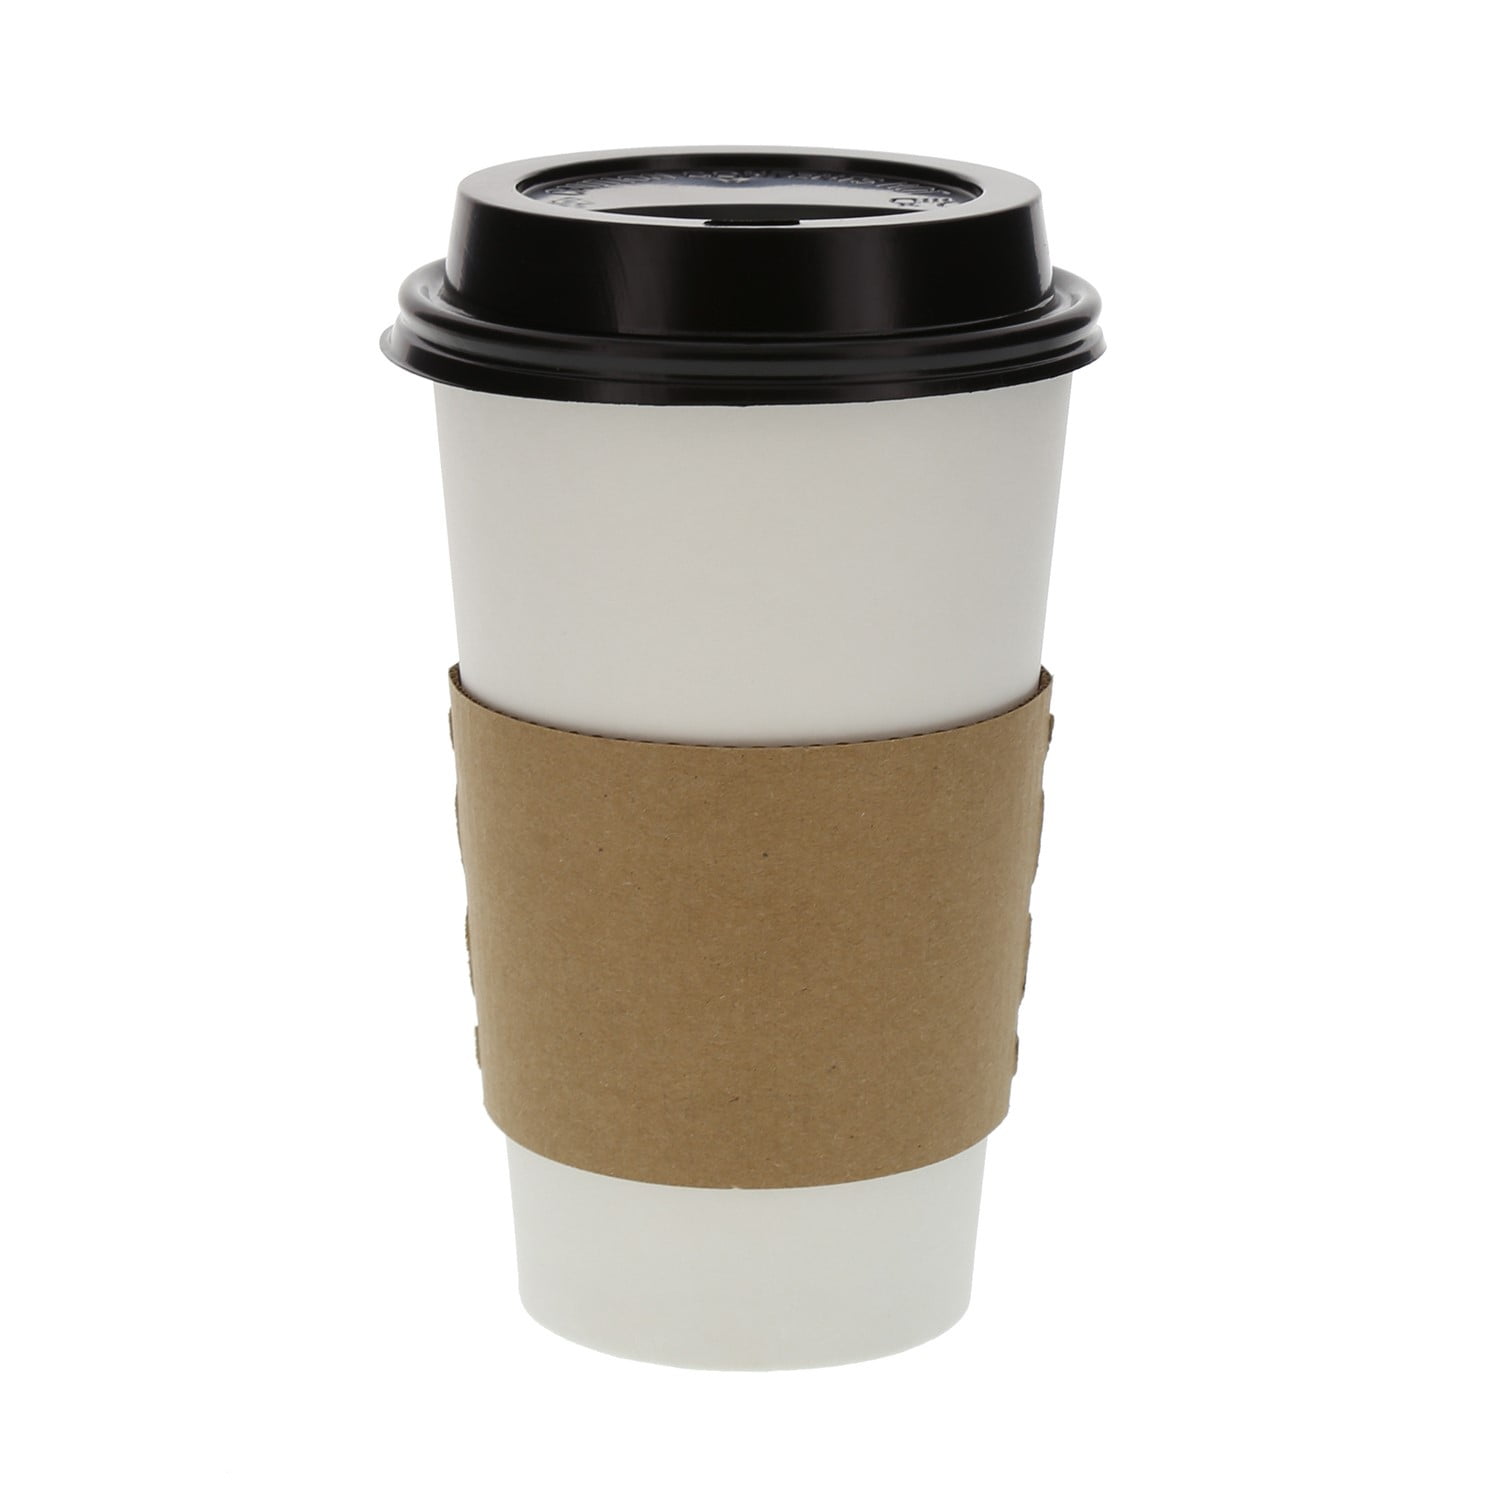 Sleeves ONLY: Restpresso Hot Coffee Sleeves with Handle, 1000 Disposable Cup Sleeves - Cups Sold Separately, Fits 12-, 16-, and 20-Ounce Cups, Yellow